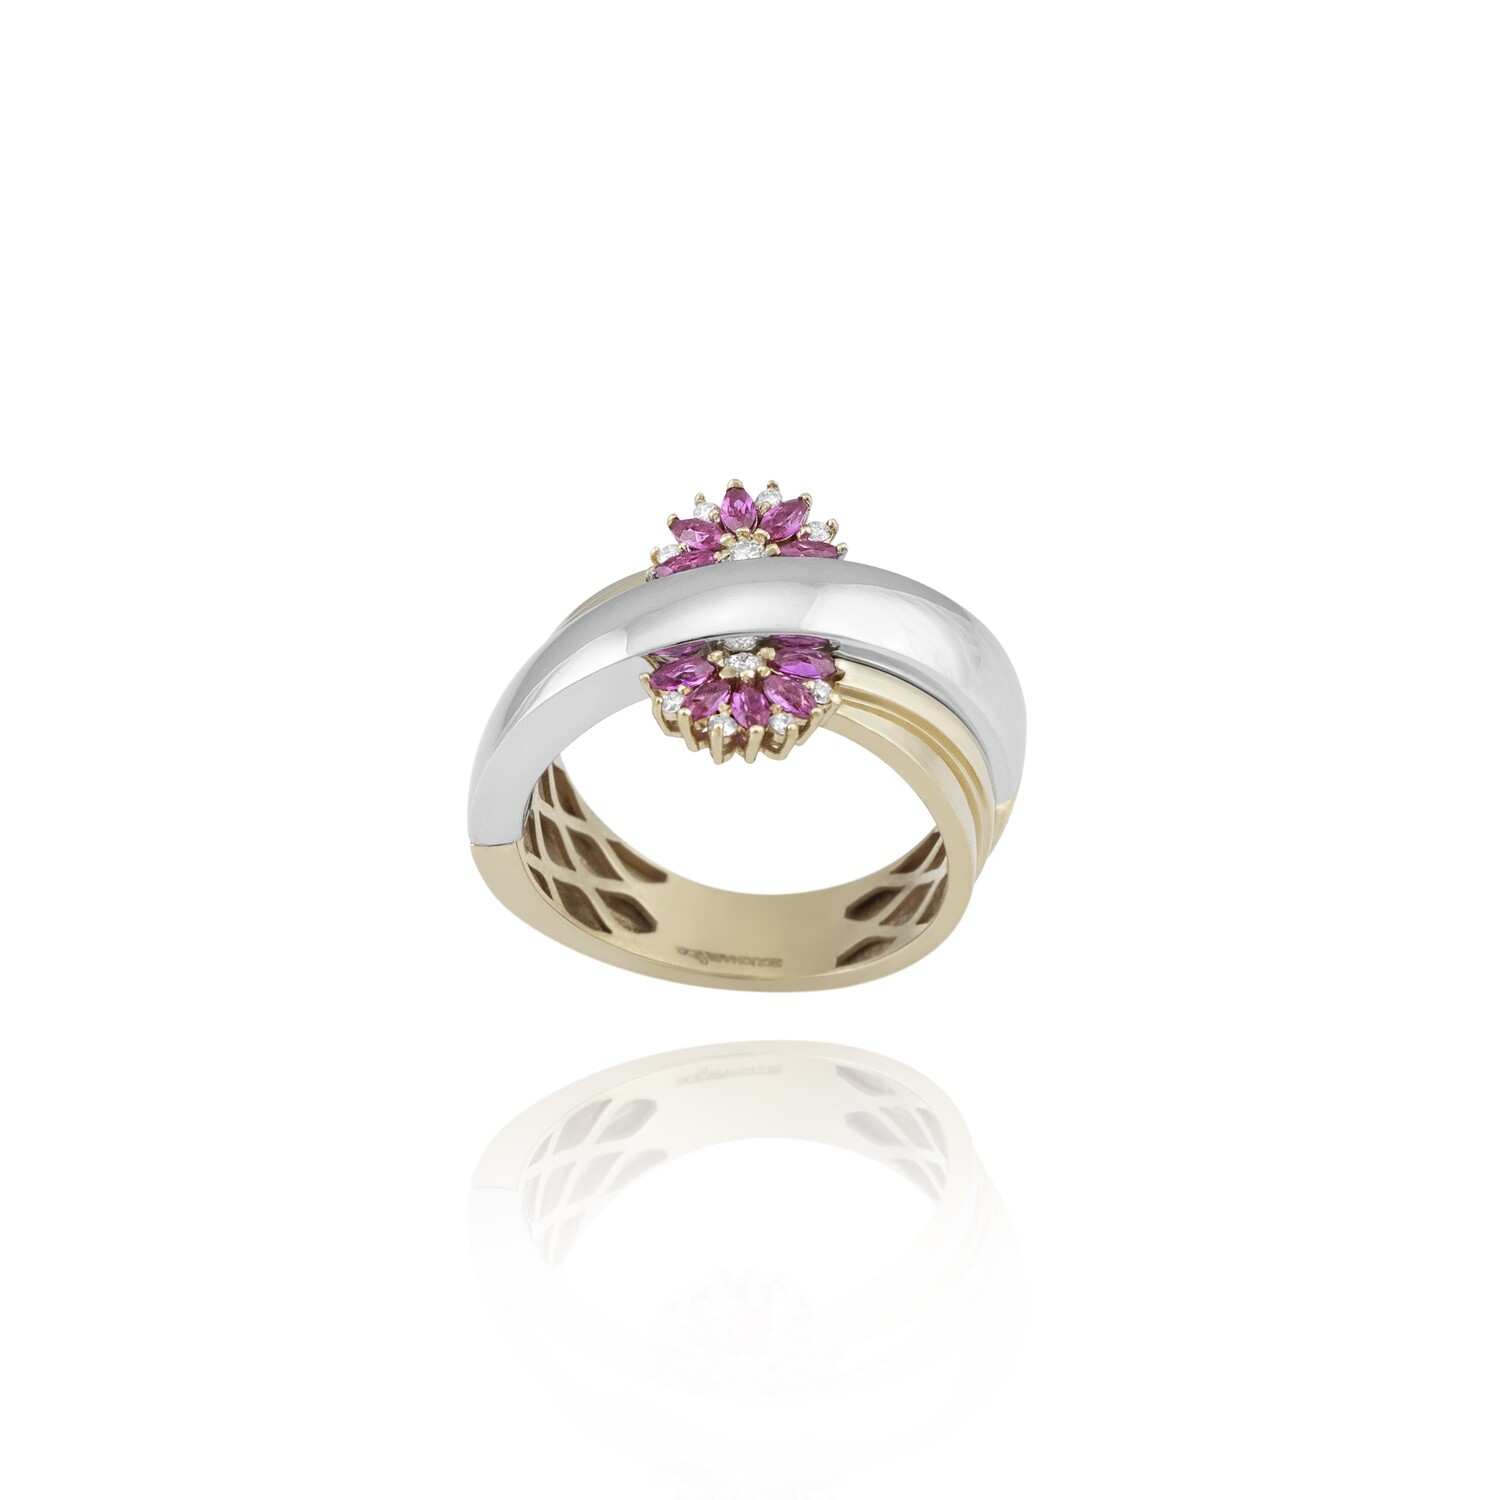 Eternal Diamond Ring with Colored Stones